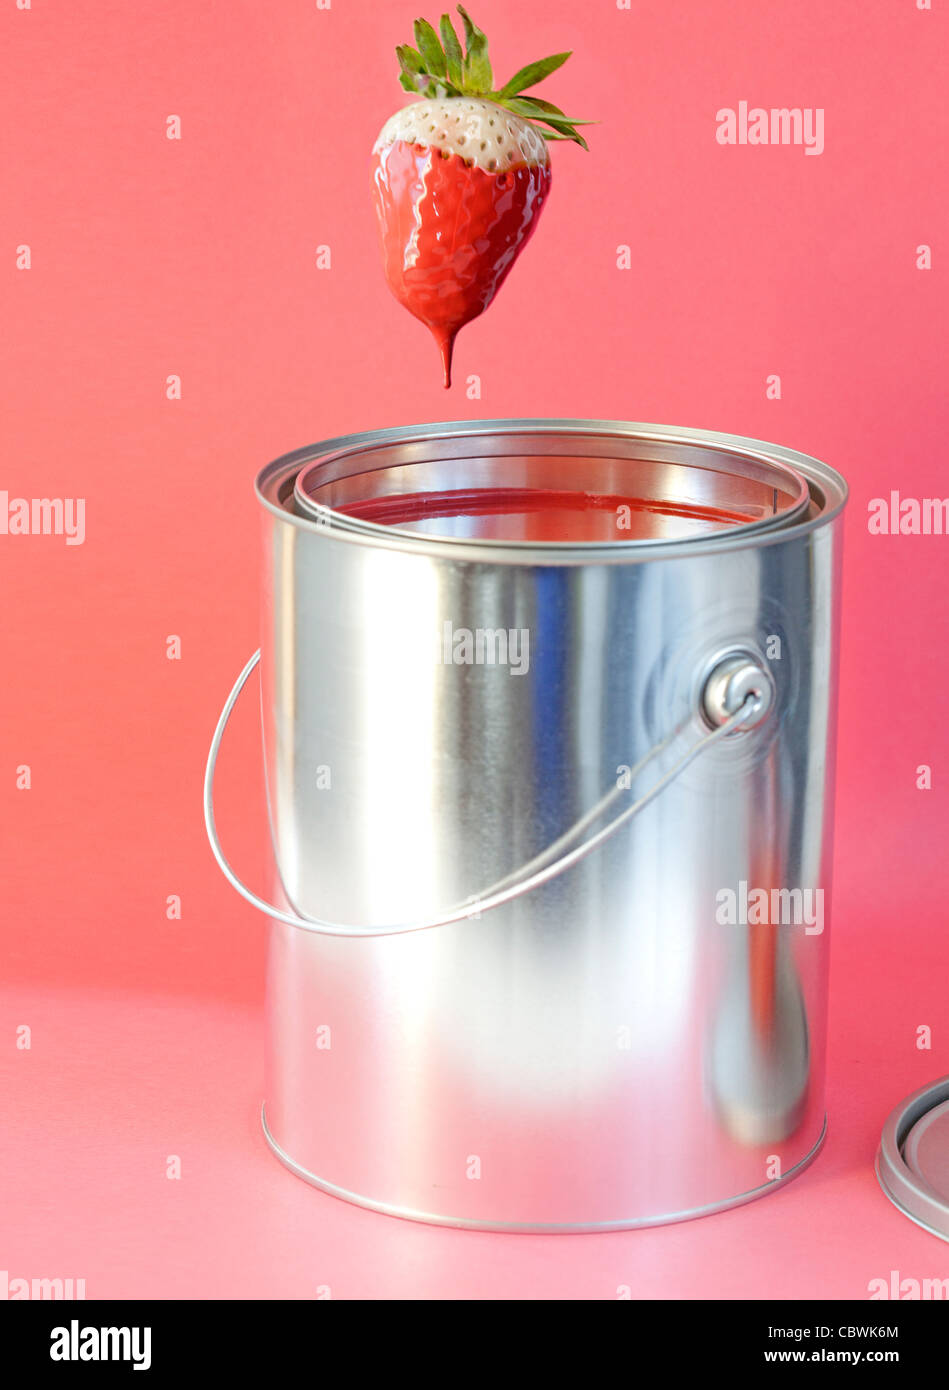 white strawberry dipped into a can of red paint Stock Photo